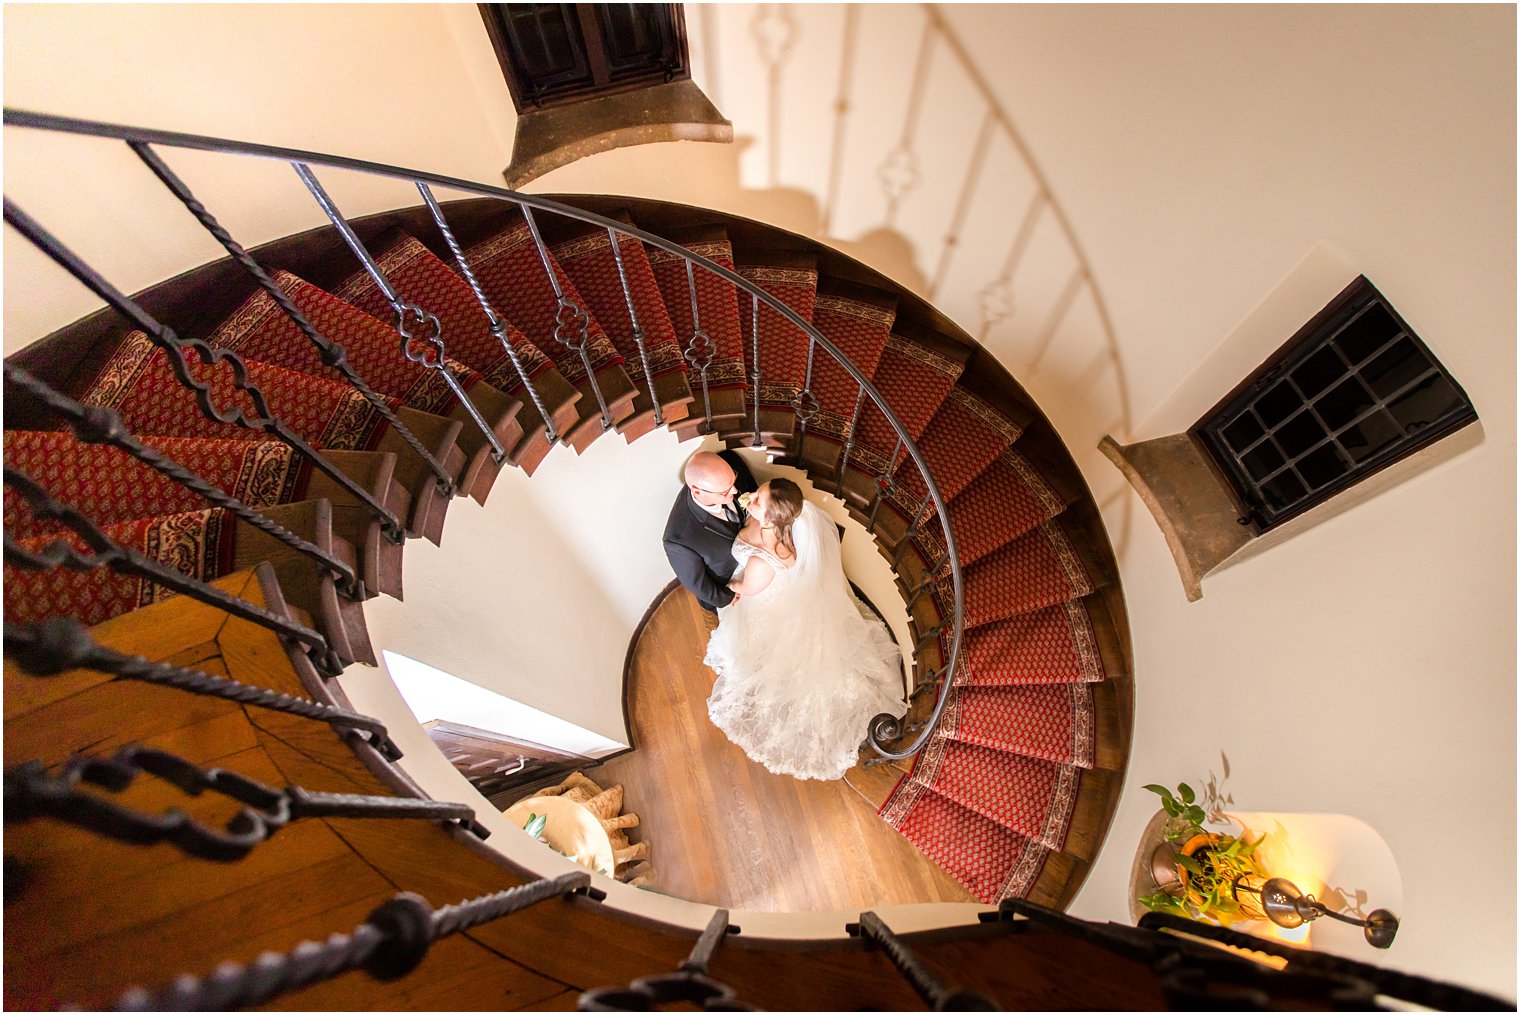 romantic wedding photo in spiral staircase at Pleasantdale Chateau winter wedding